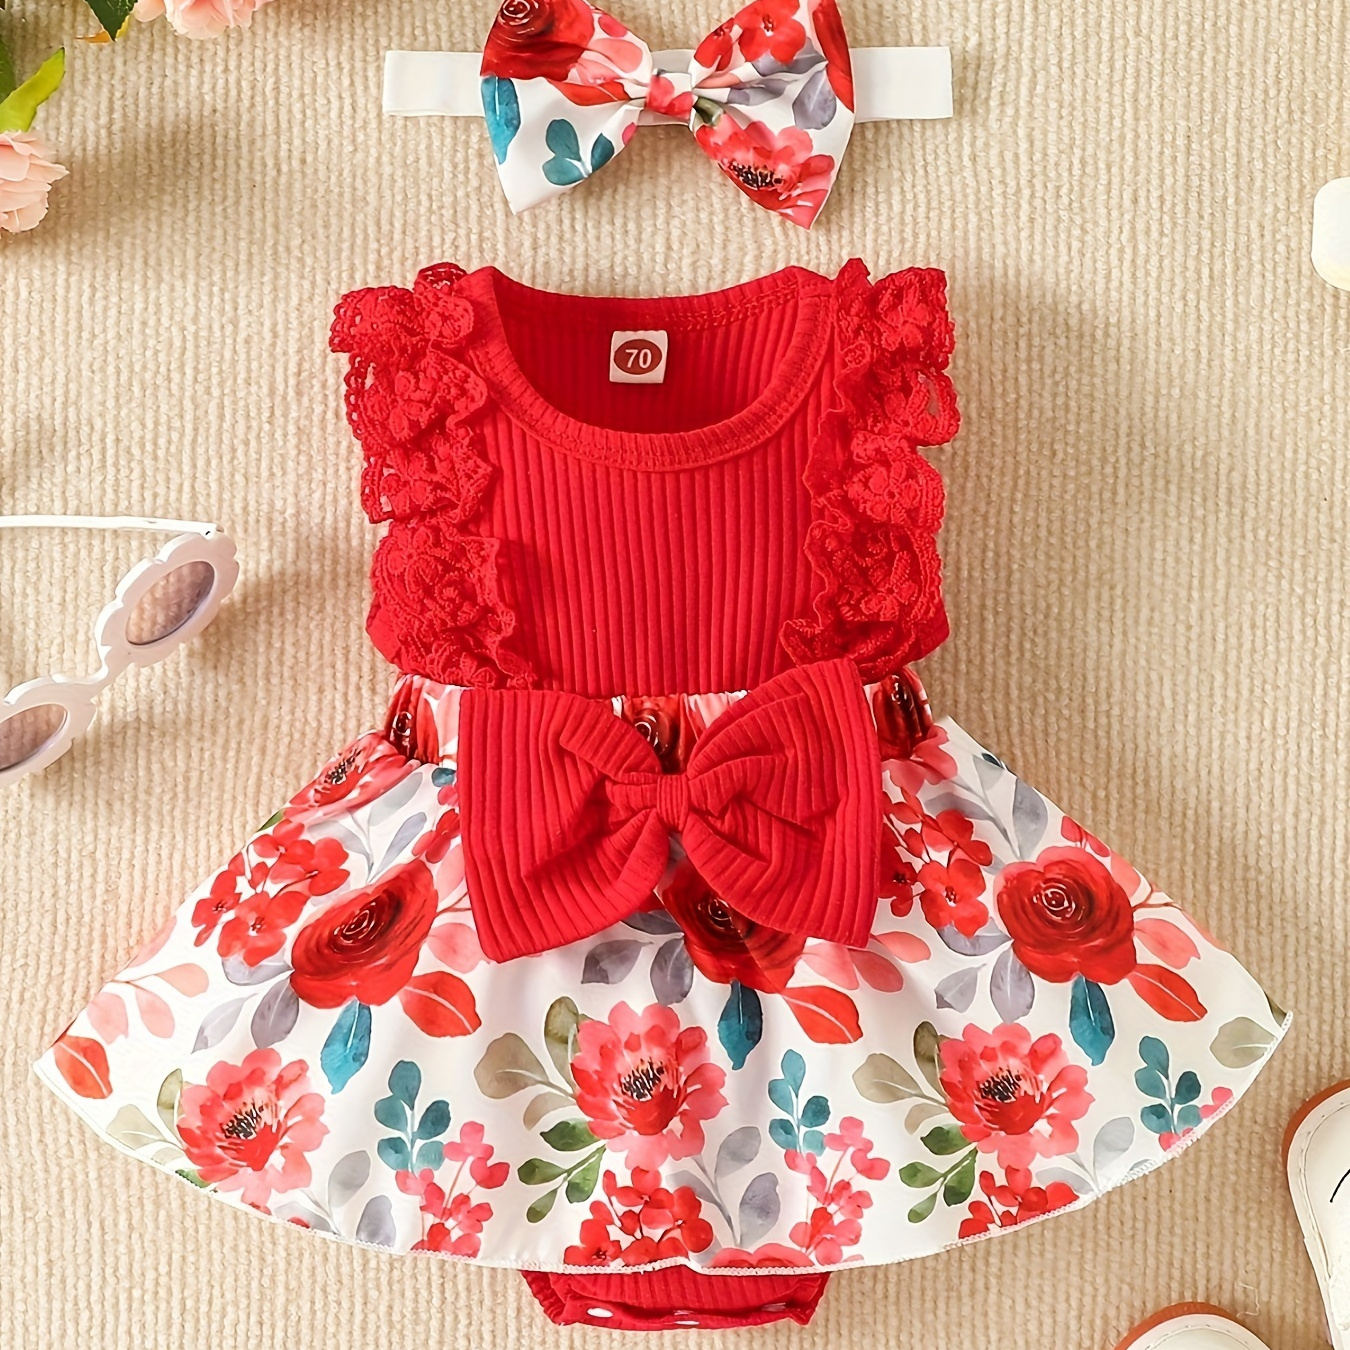 

Baby Girl Clothes Newborn Romper Flower Pattern Dress Infant Lace Ruffle Sleeveless Summer One-piece Outfits With Headband 0-12 Months